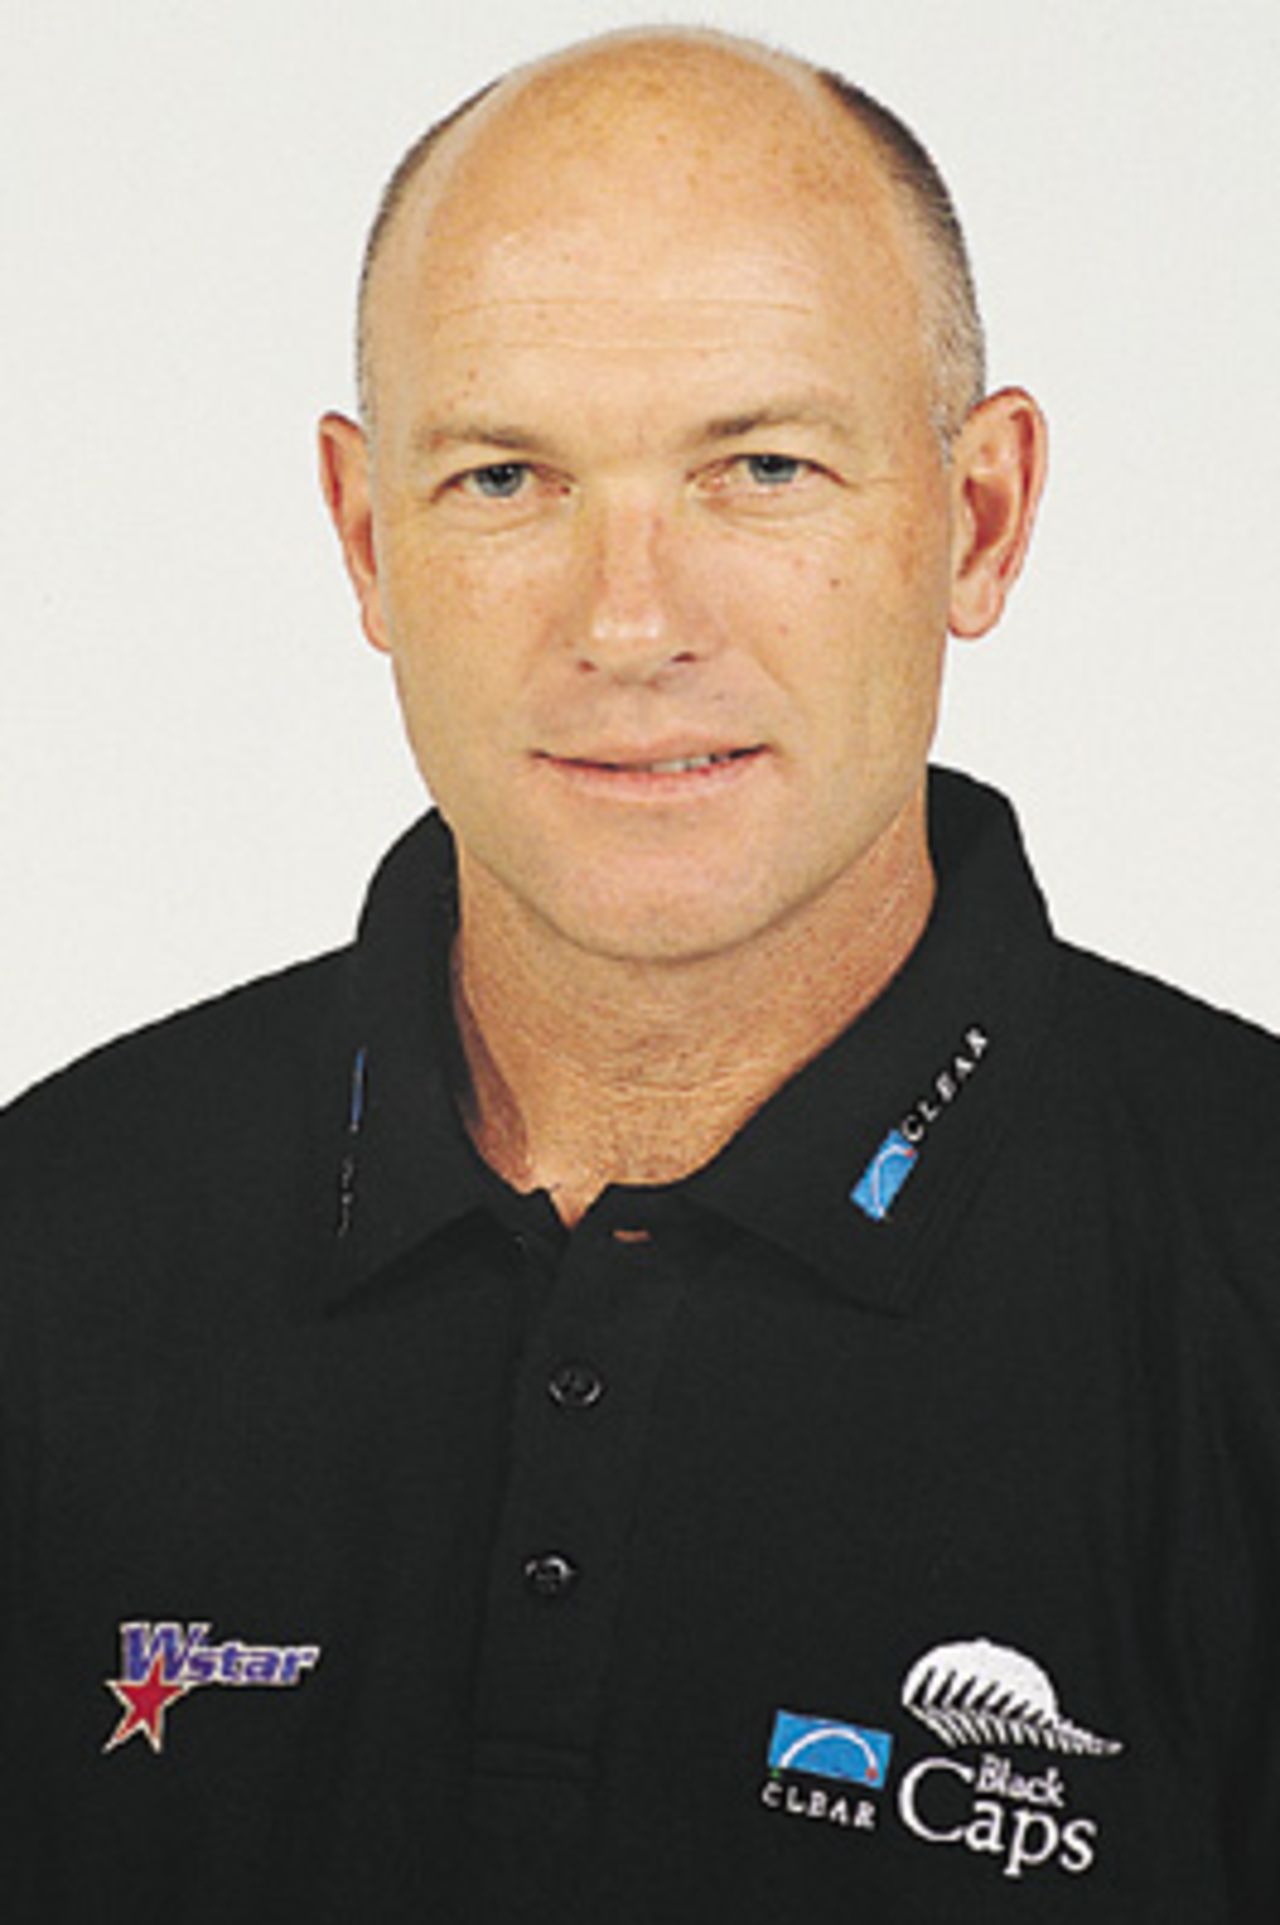 Portrait of Jeff Crowe - New Zealand manager in the 2000/01 season